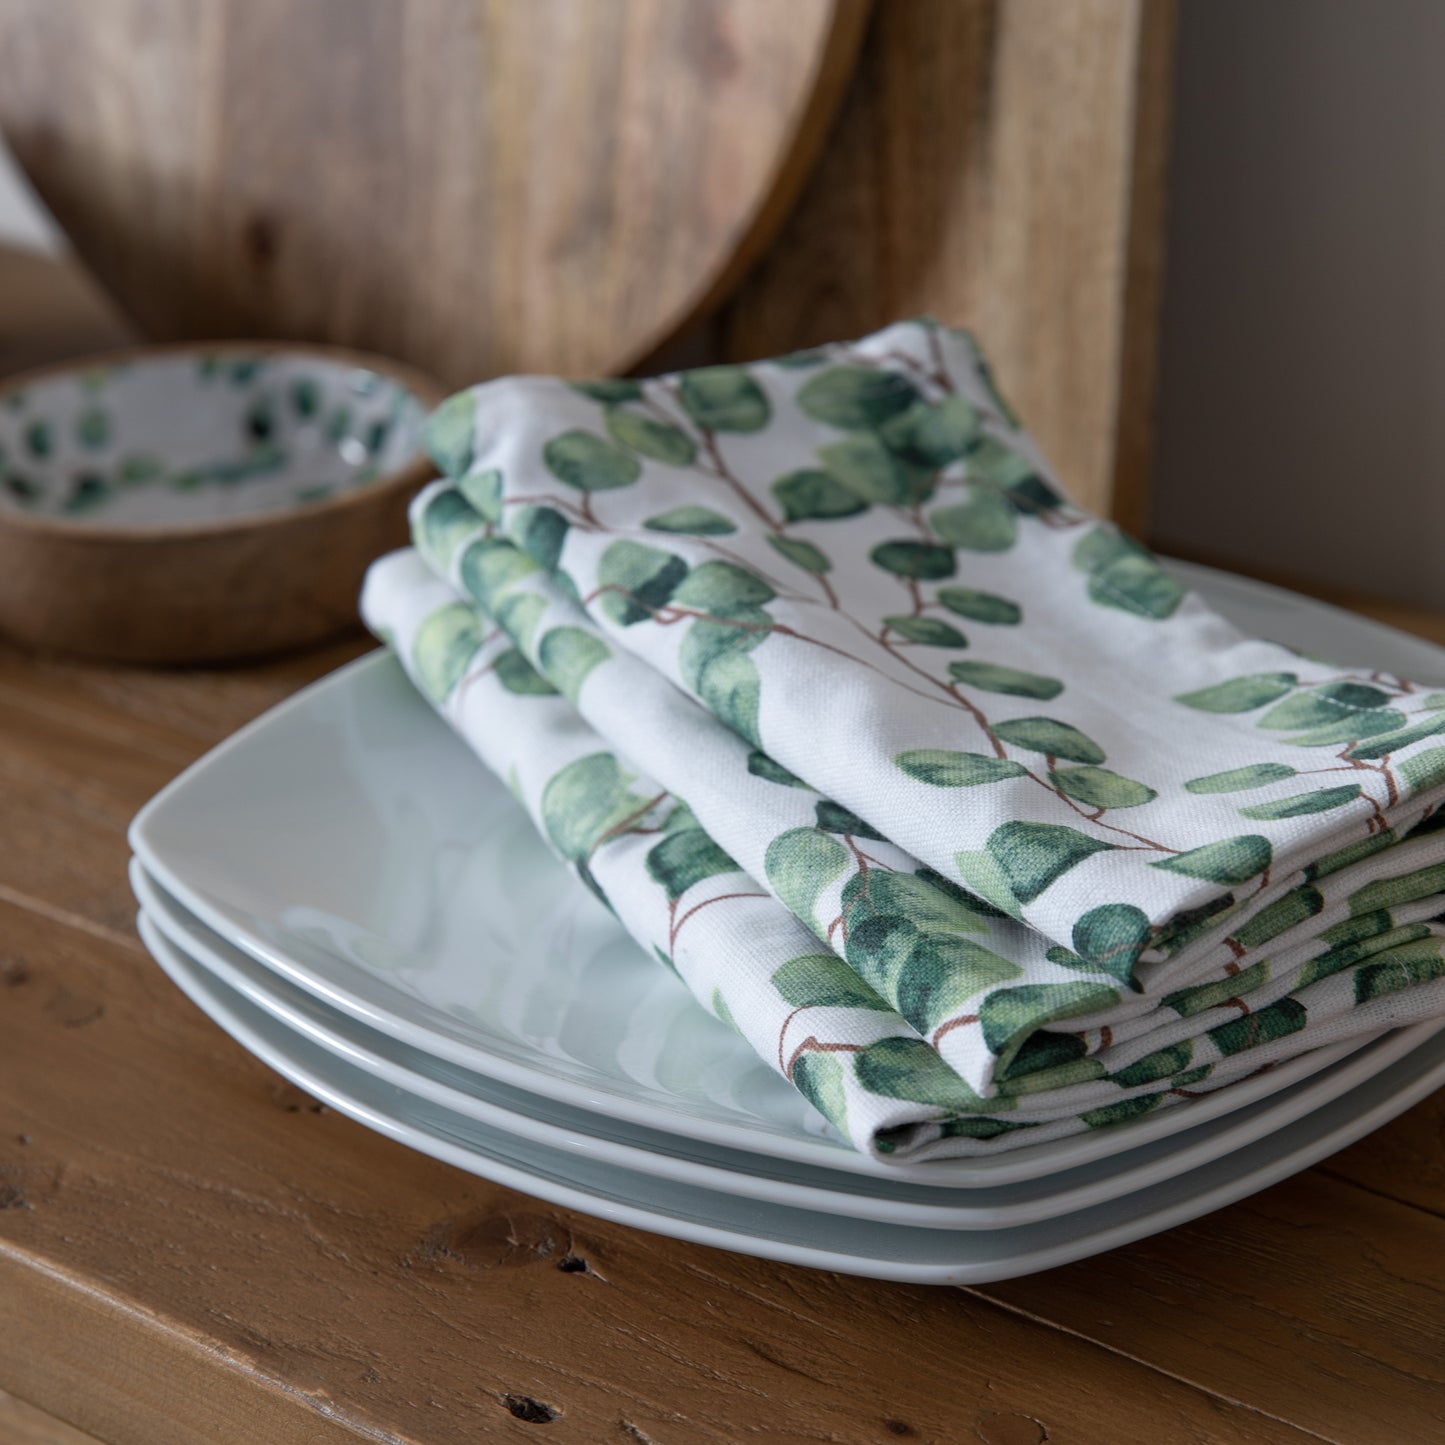 Load image into Gallery viewer, Kikiathome.co.uk Eucalyptus Napkin 450x450mm (4pk) on a wooden table for interior decor.
